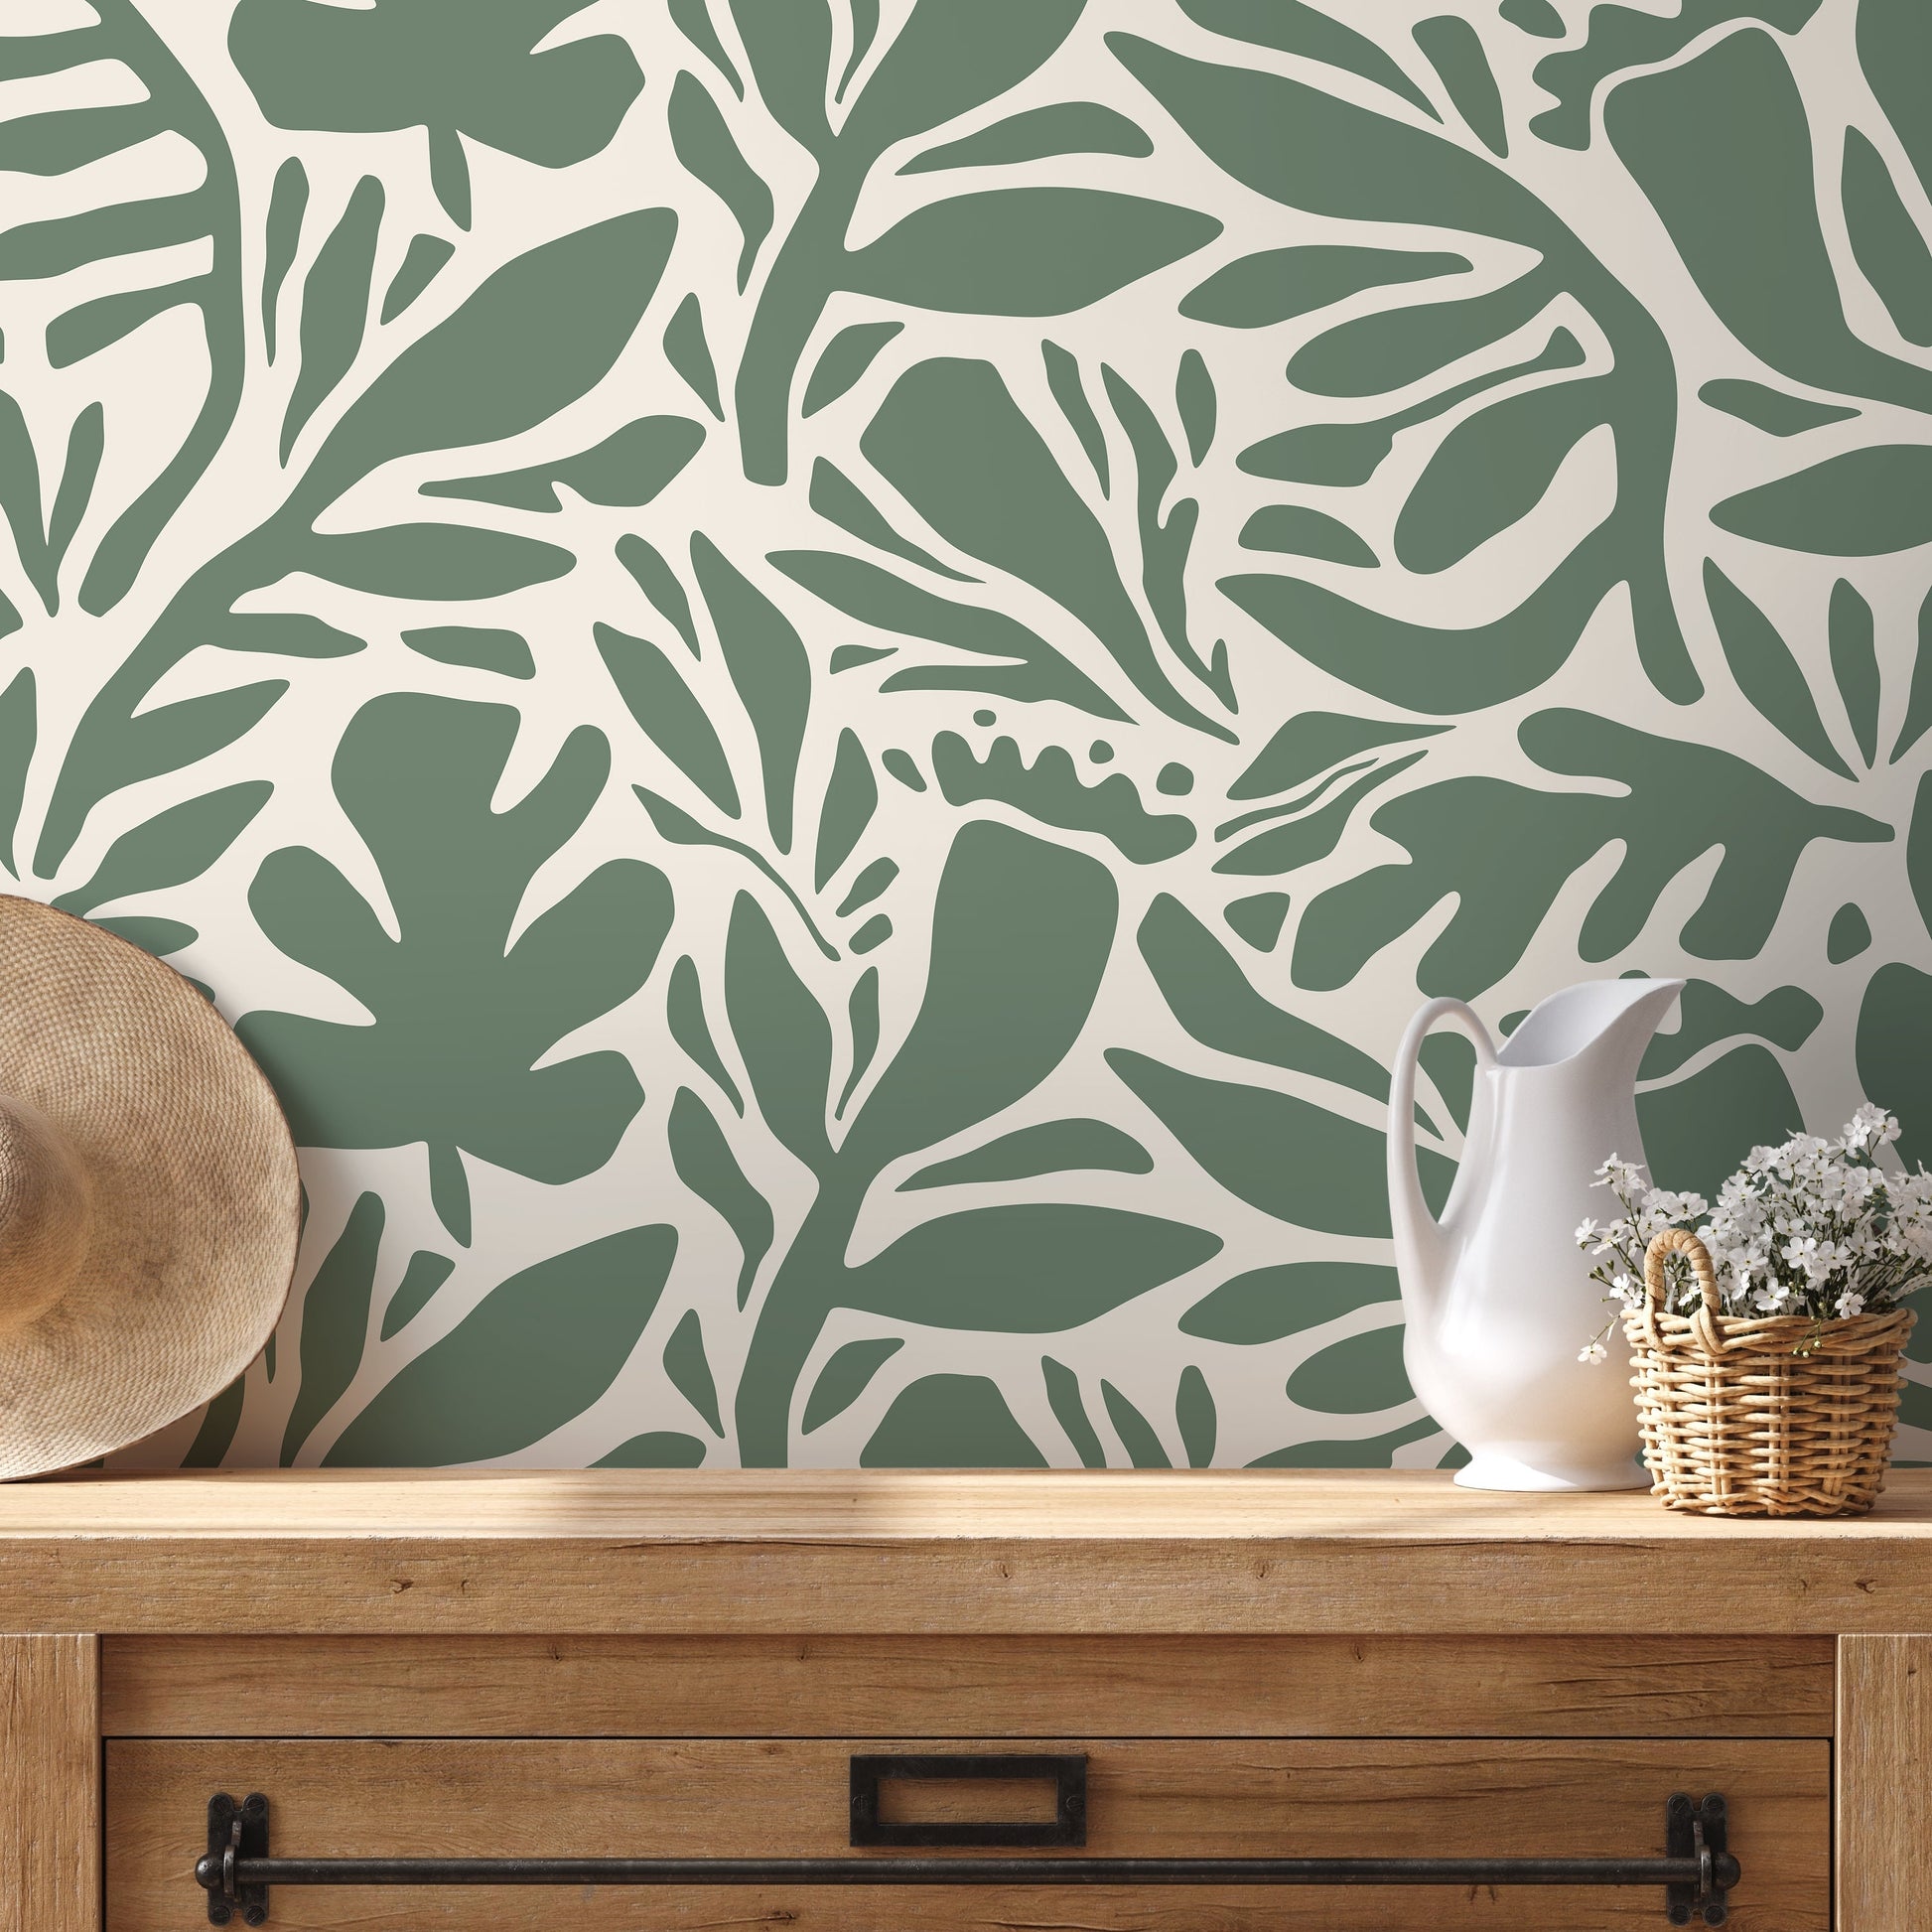 Sage Green Leaves Wallpaper Abstract Wallpaper Peel and Stick and Traditional Wallpaper - D697